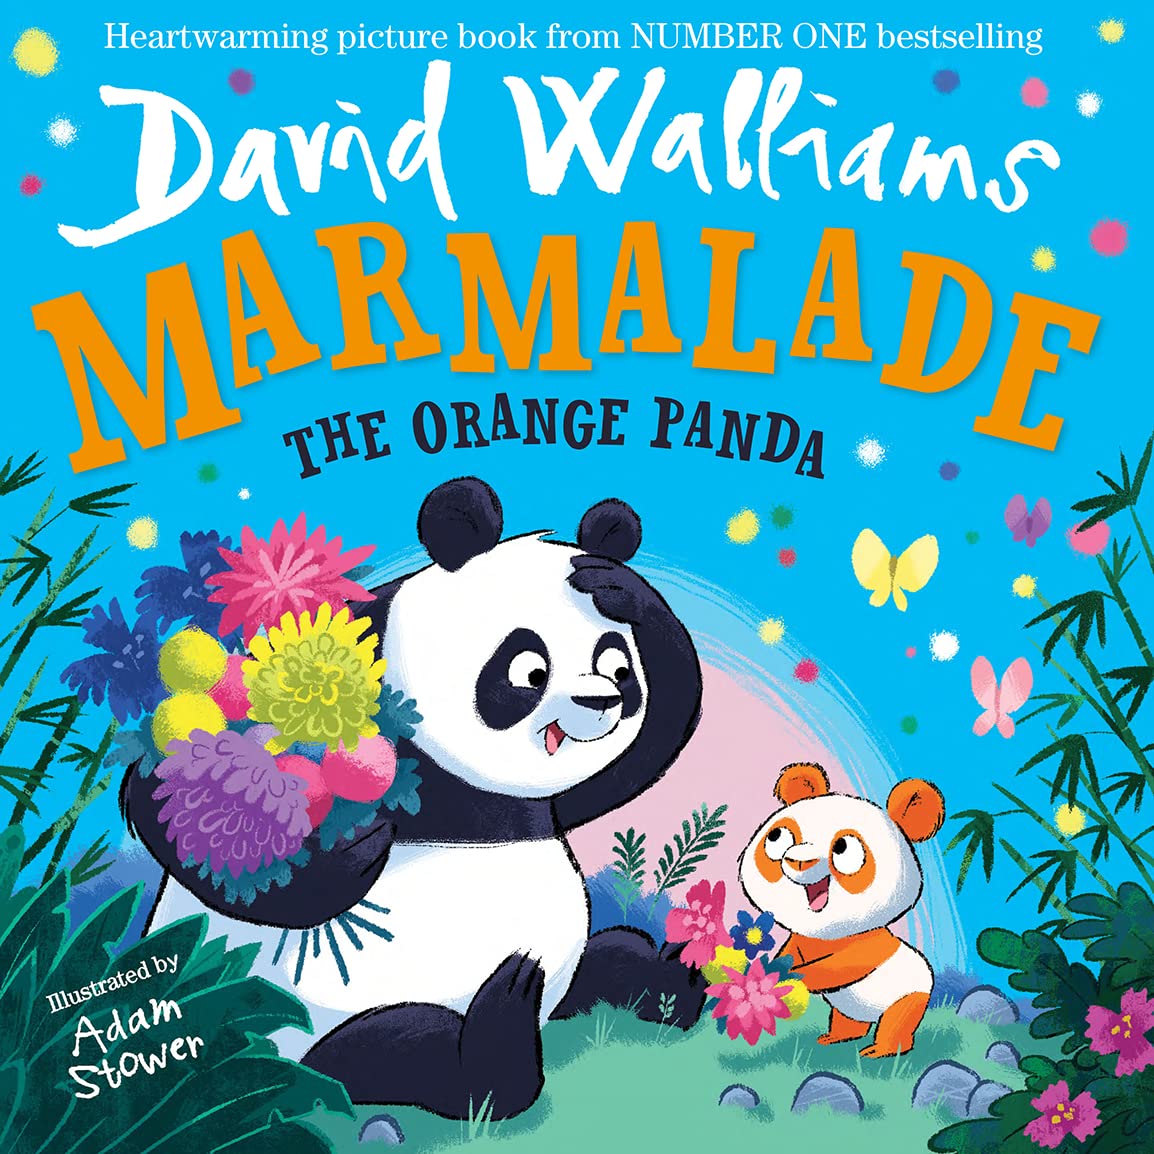 Marmalade: The Heart Warming And Hilarious New Picture Book